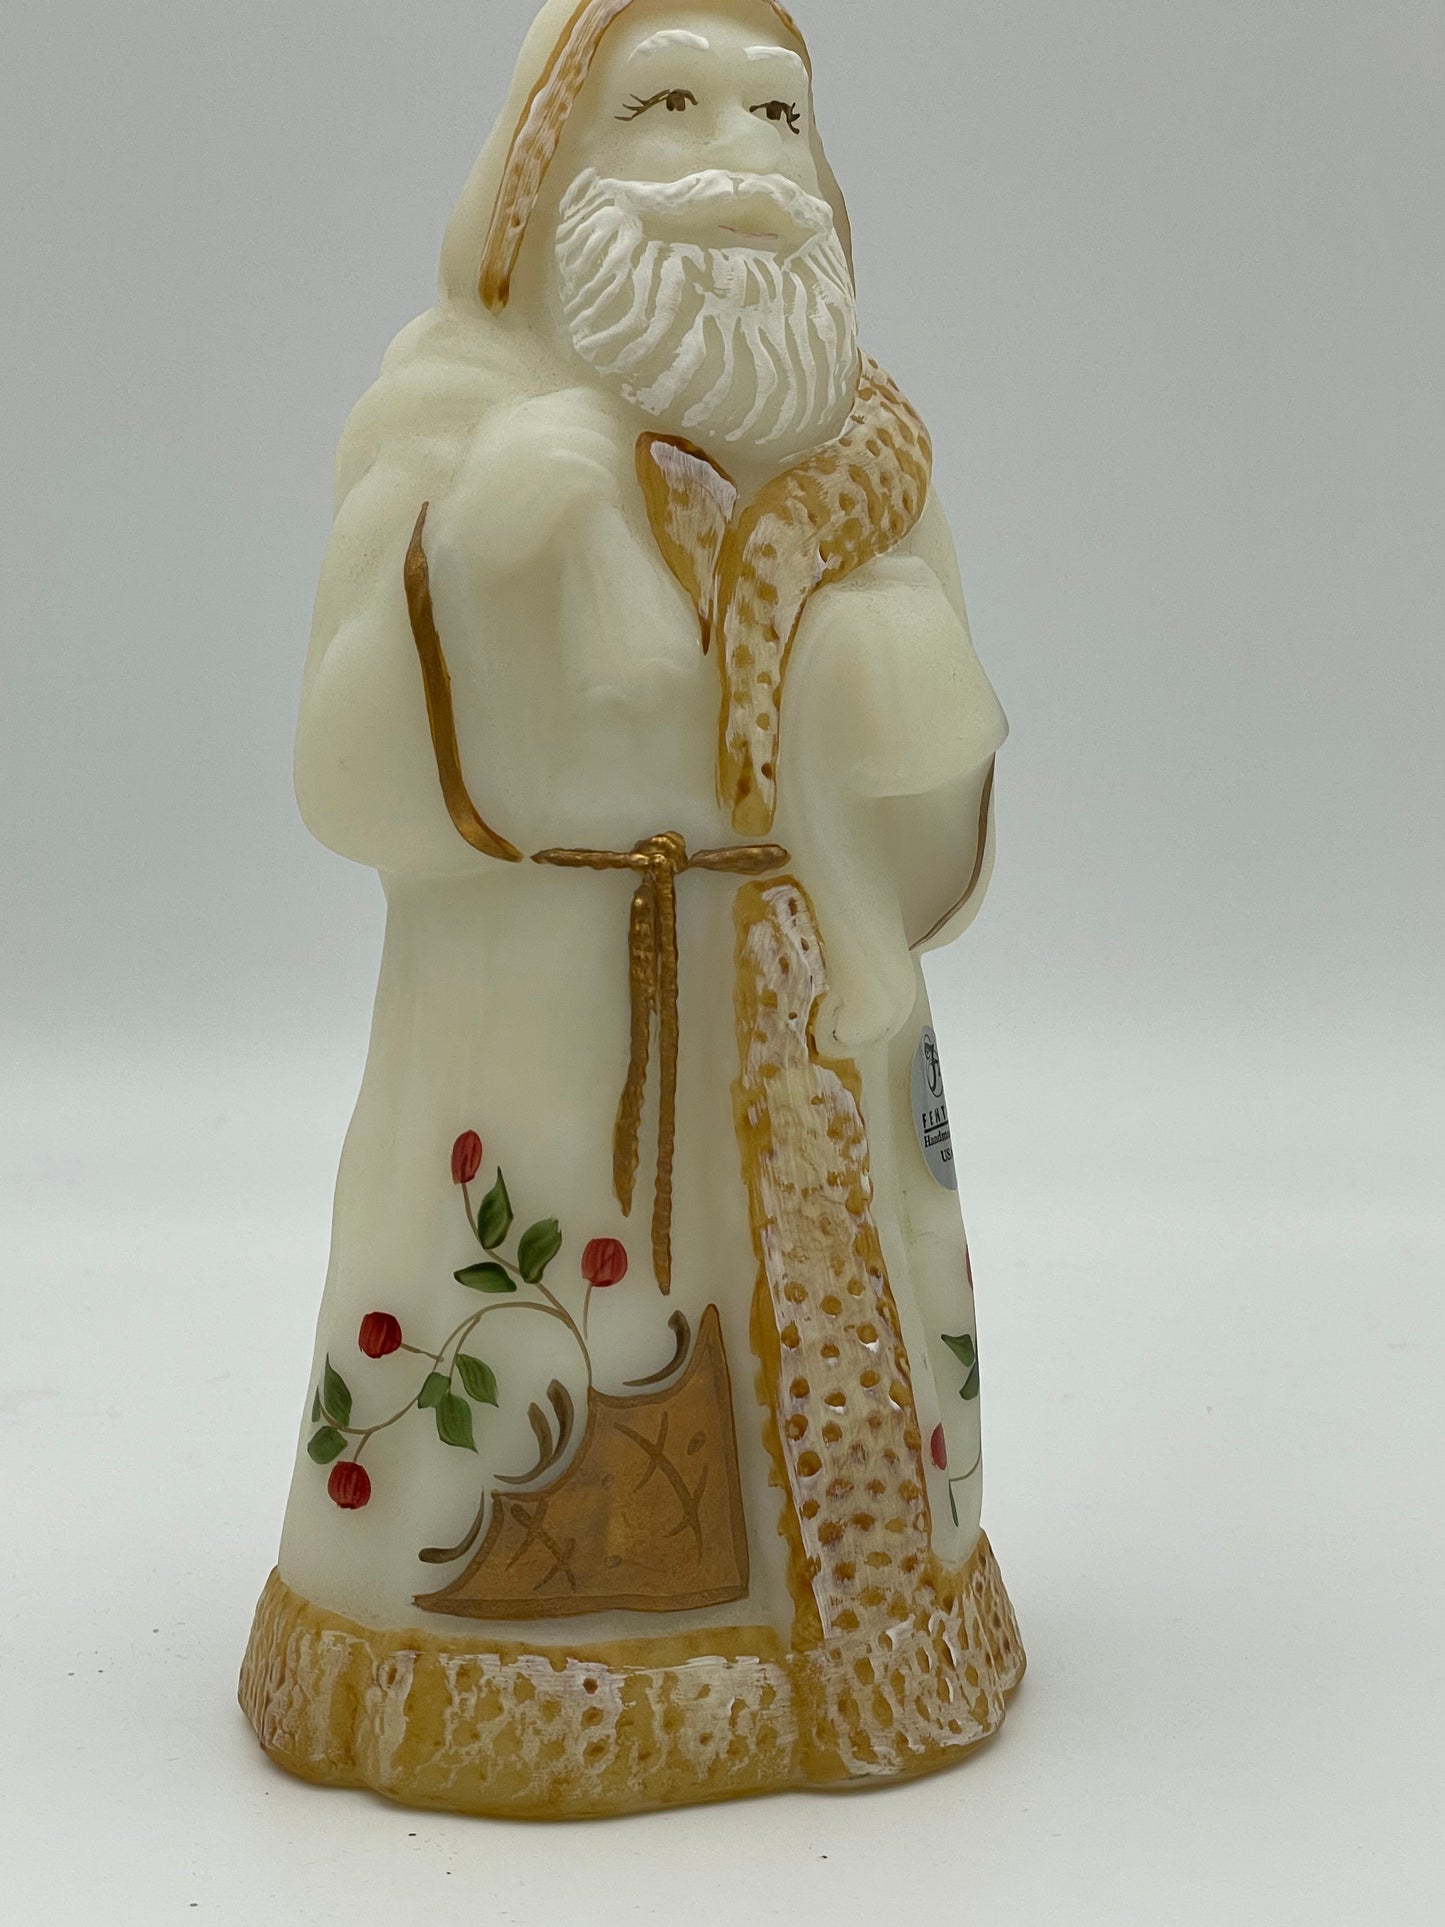 Collectable Fenton Glass TWINING BERRIES Santa Claus Hand Painted and Signed by D.Fredrick